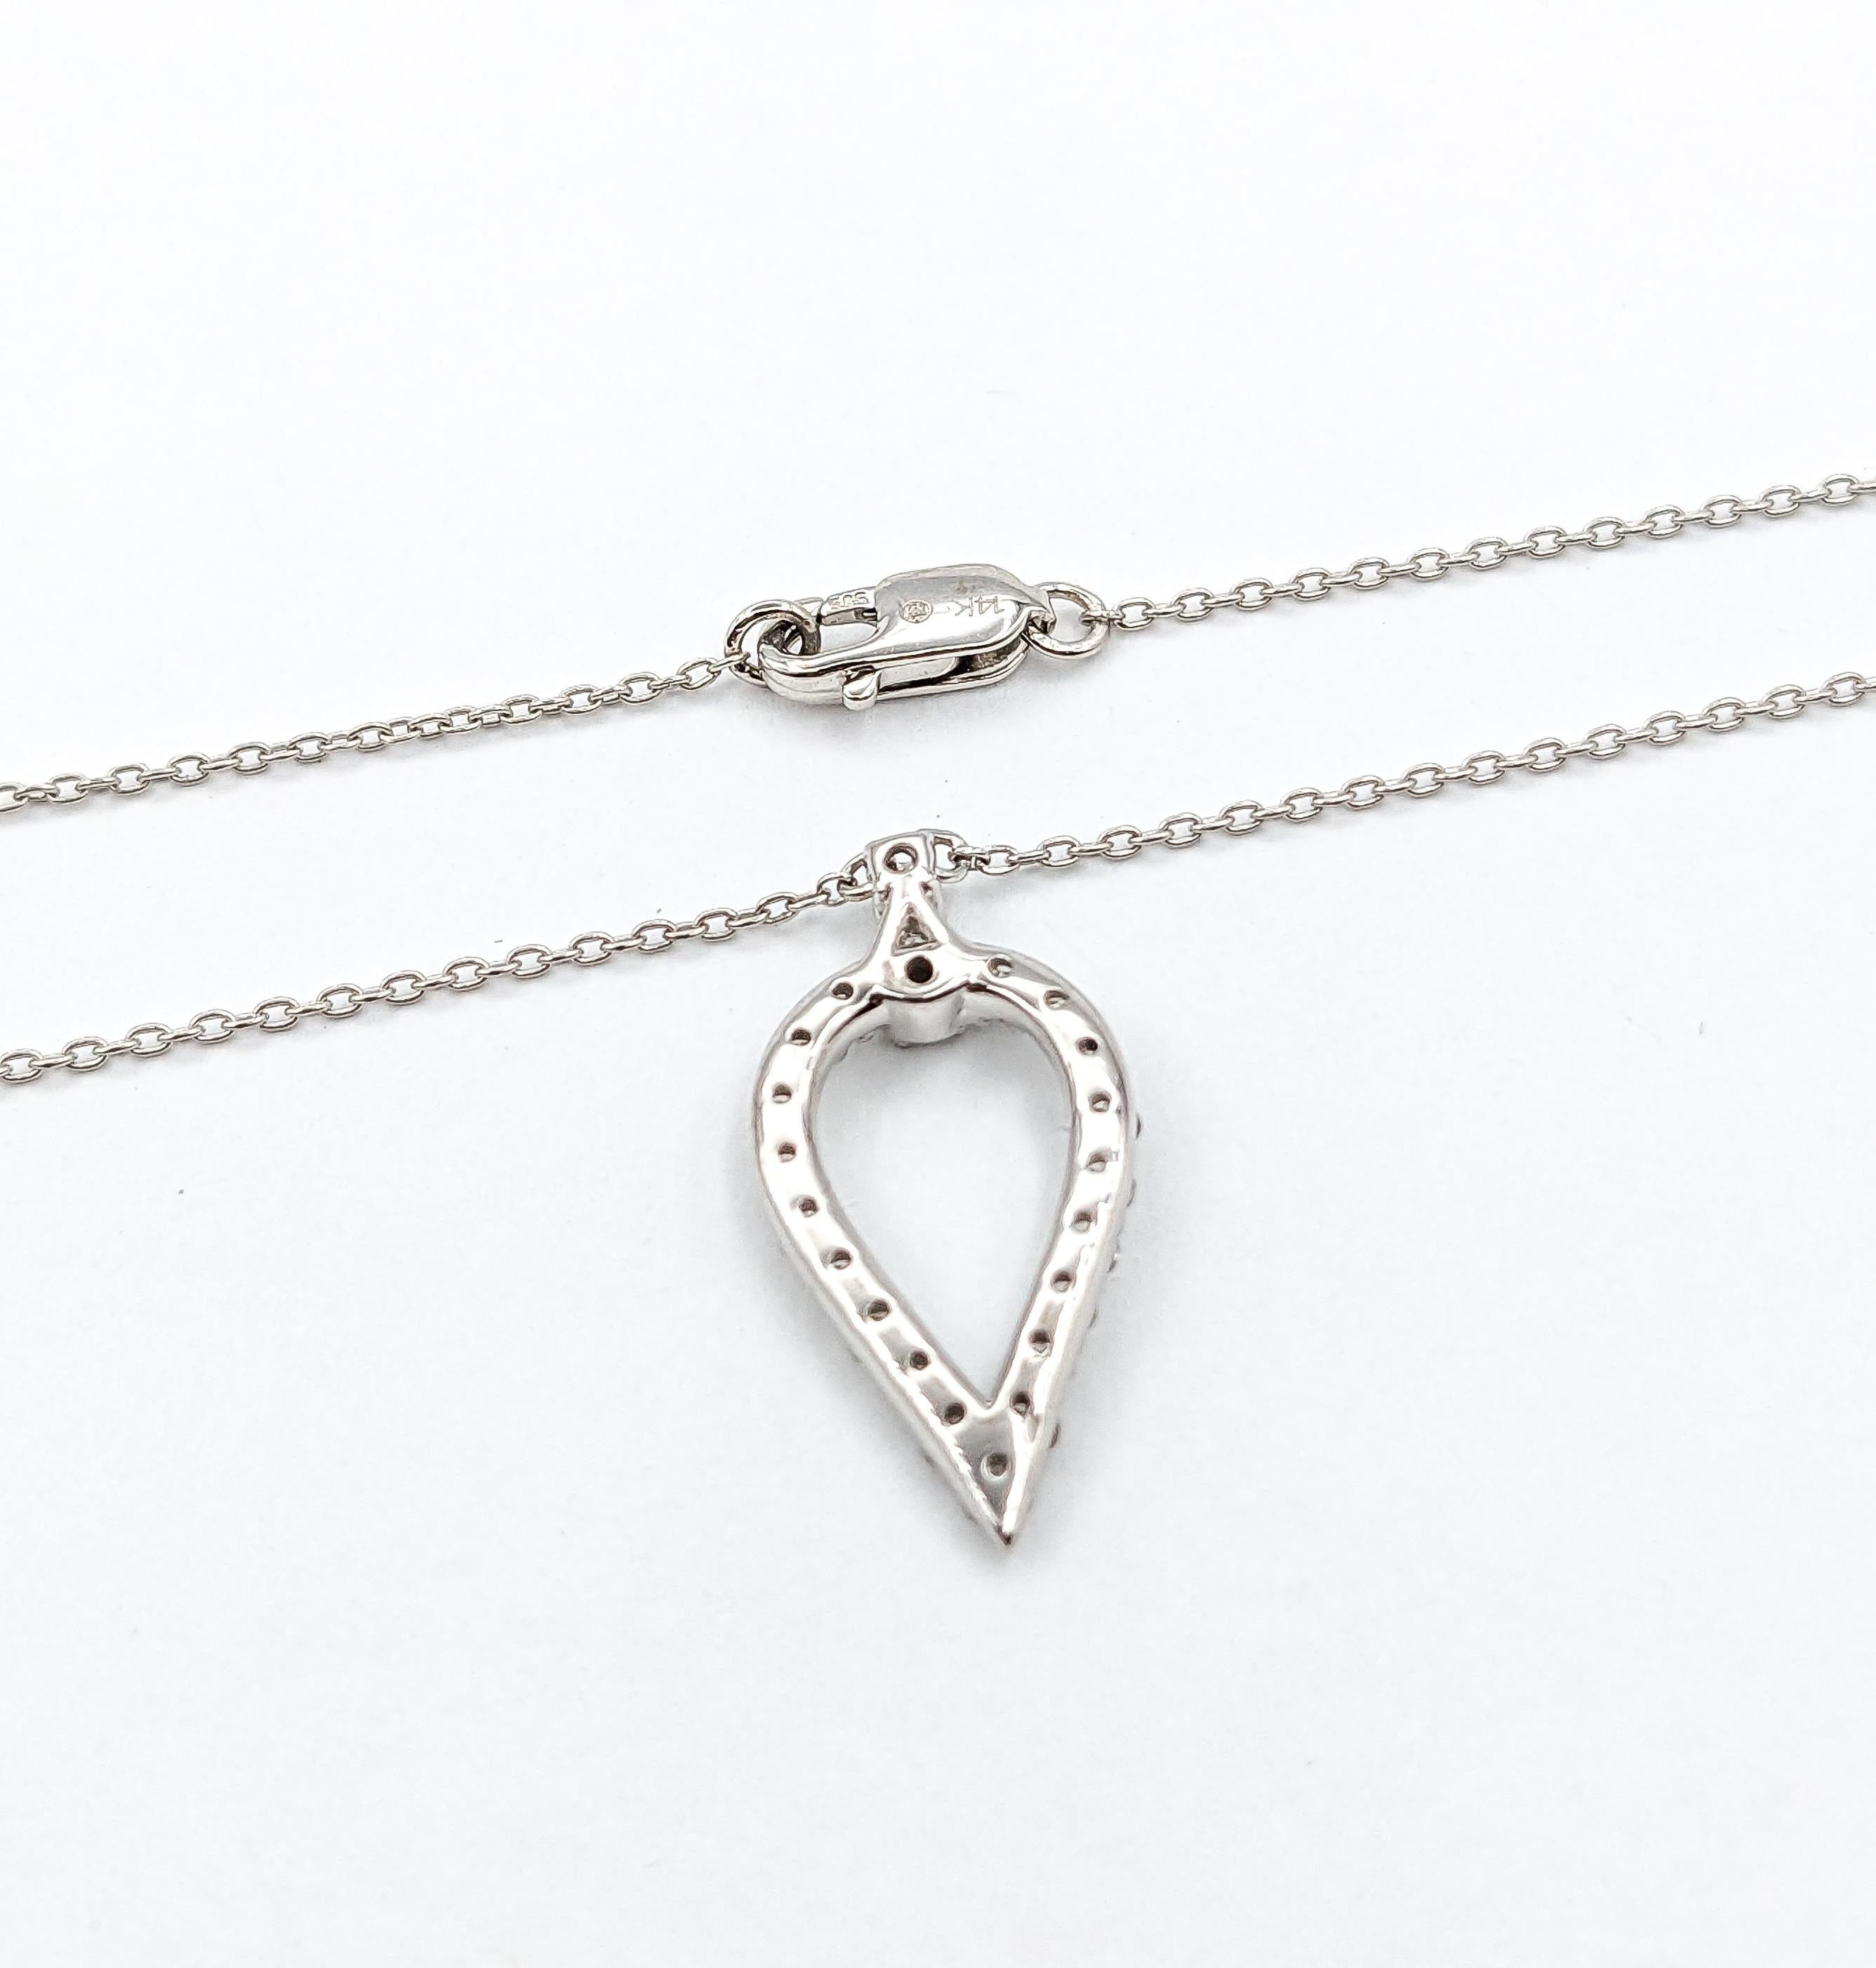 Modern Teardrop Diamond Pendant Necklace in White Gold In New Condition For Sale In Bloomington, MN